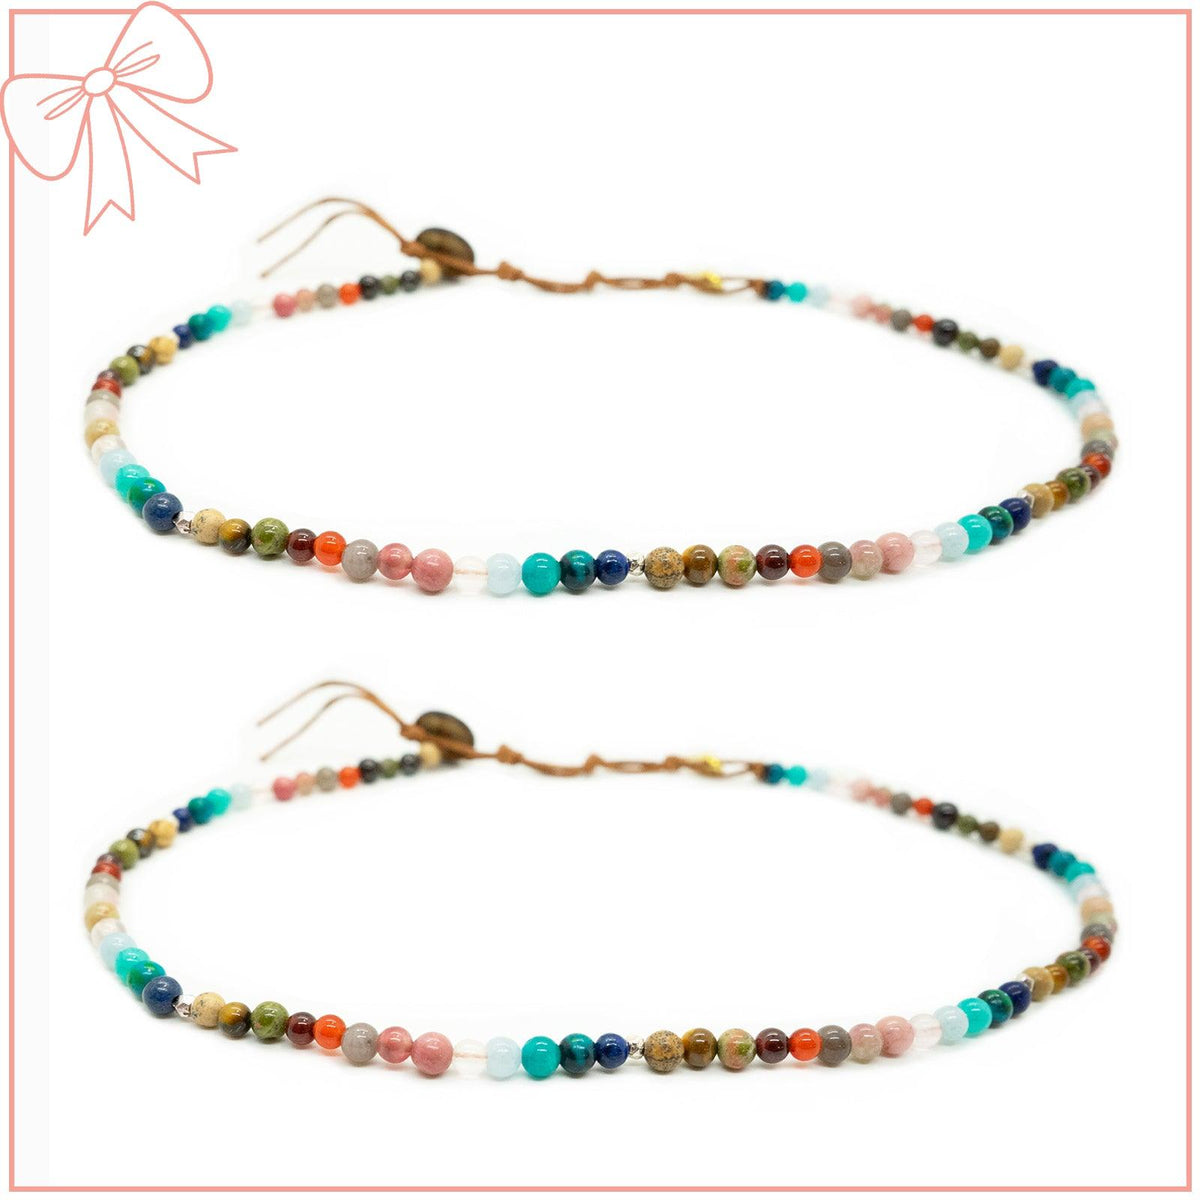 Two matching 6mm multicolor stone healing necklaces with coconut button closures